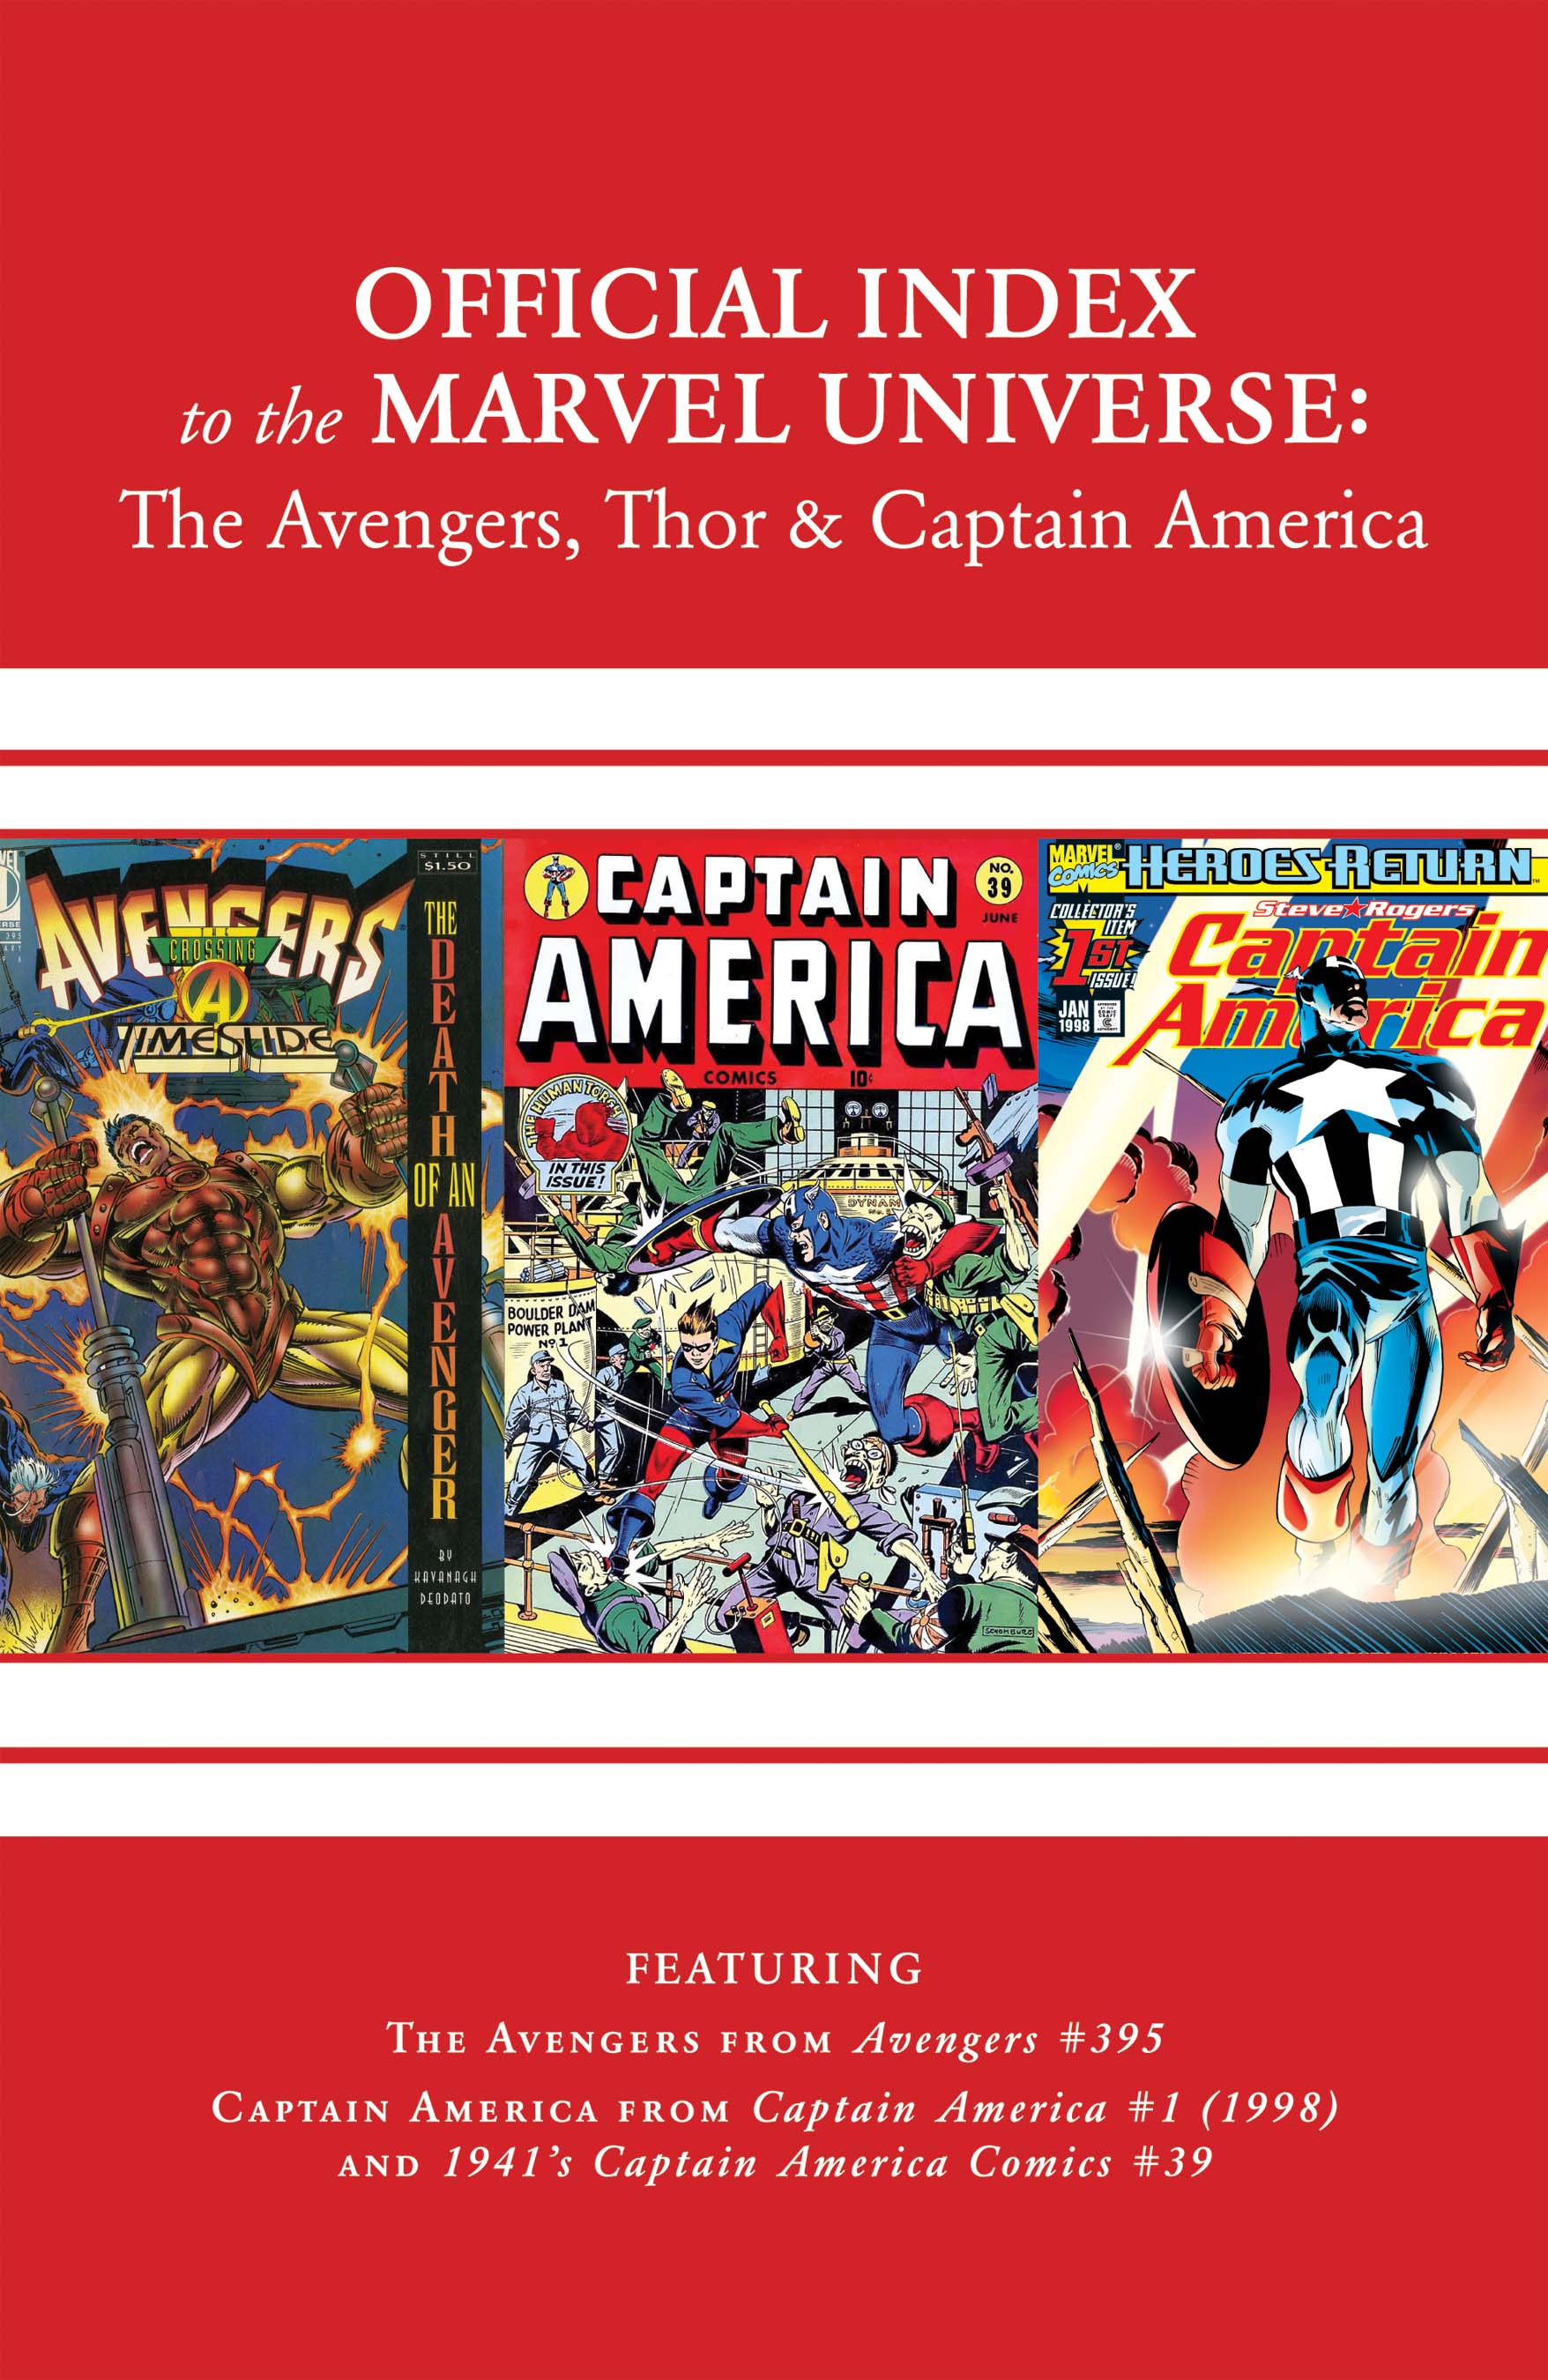 Avengers, Thor & Captain America: Official Index to the Marvel Universe (2011) #13